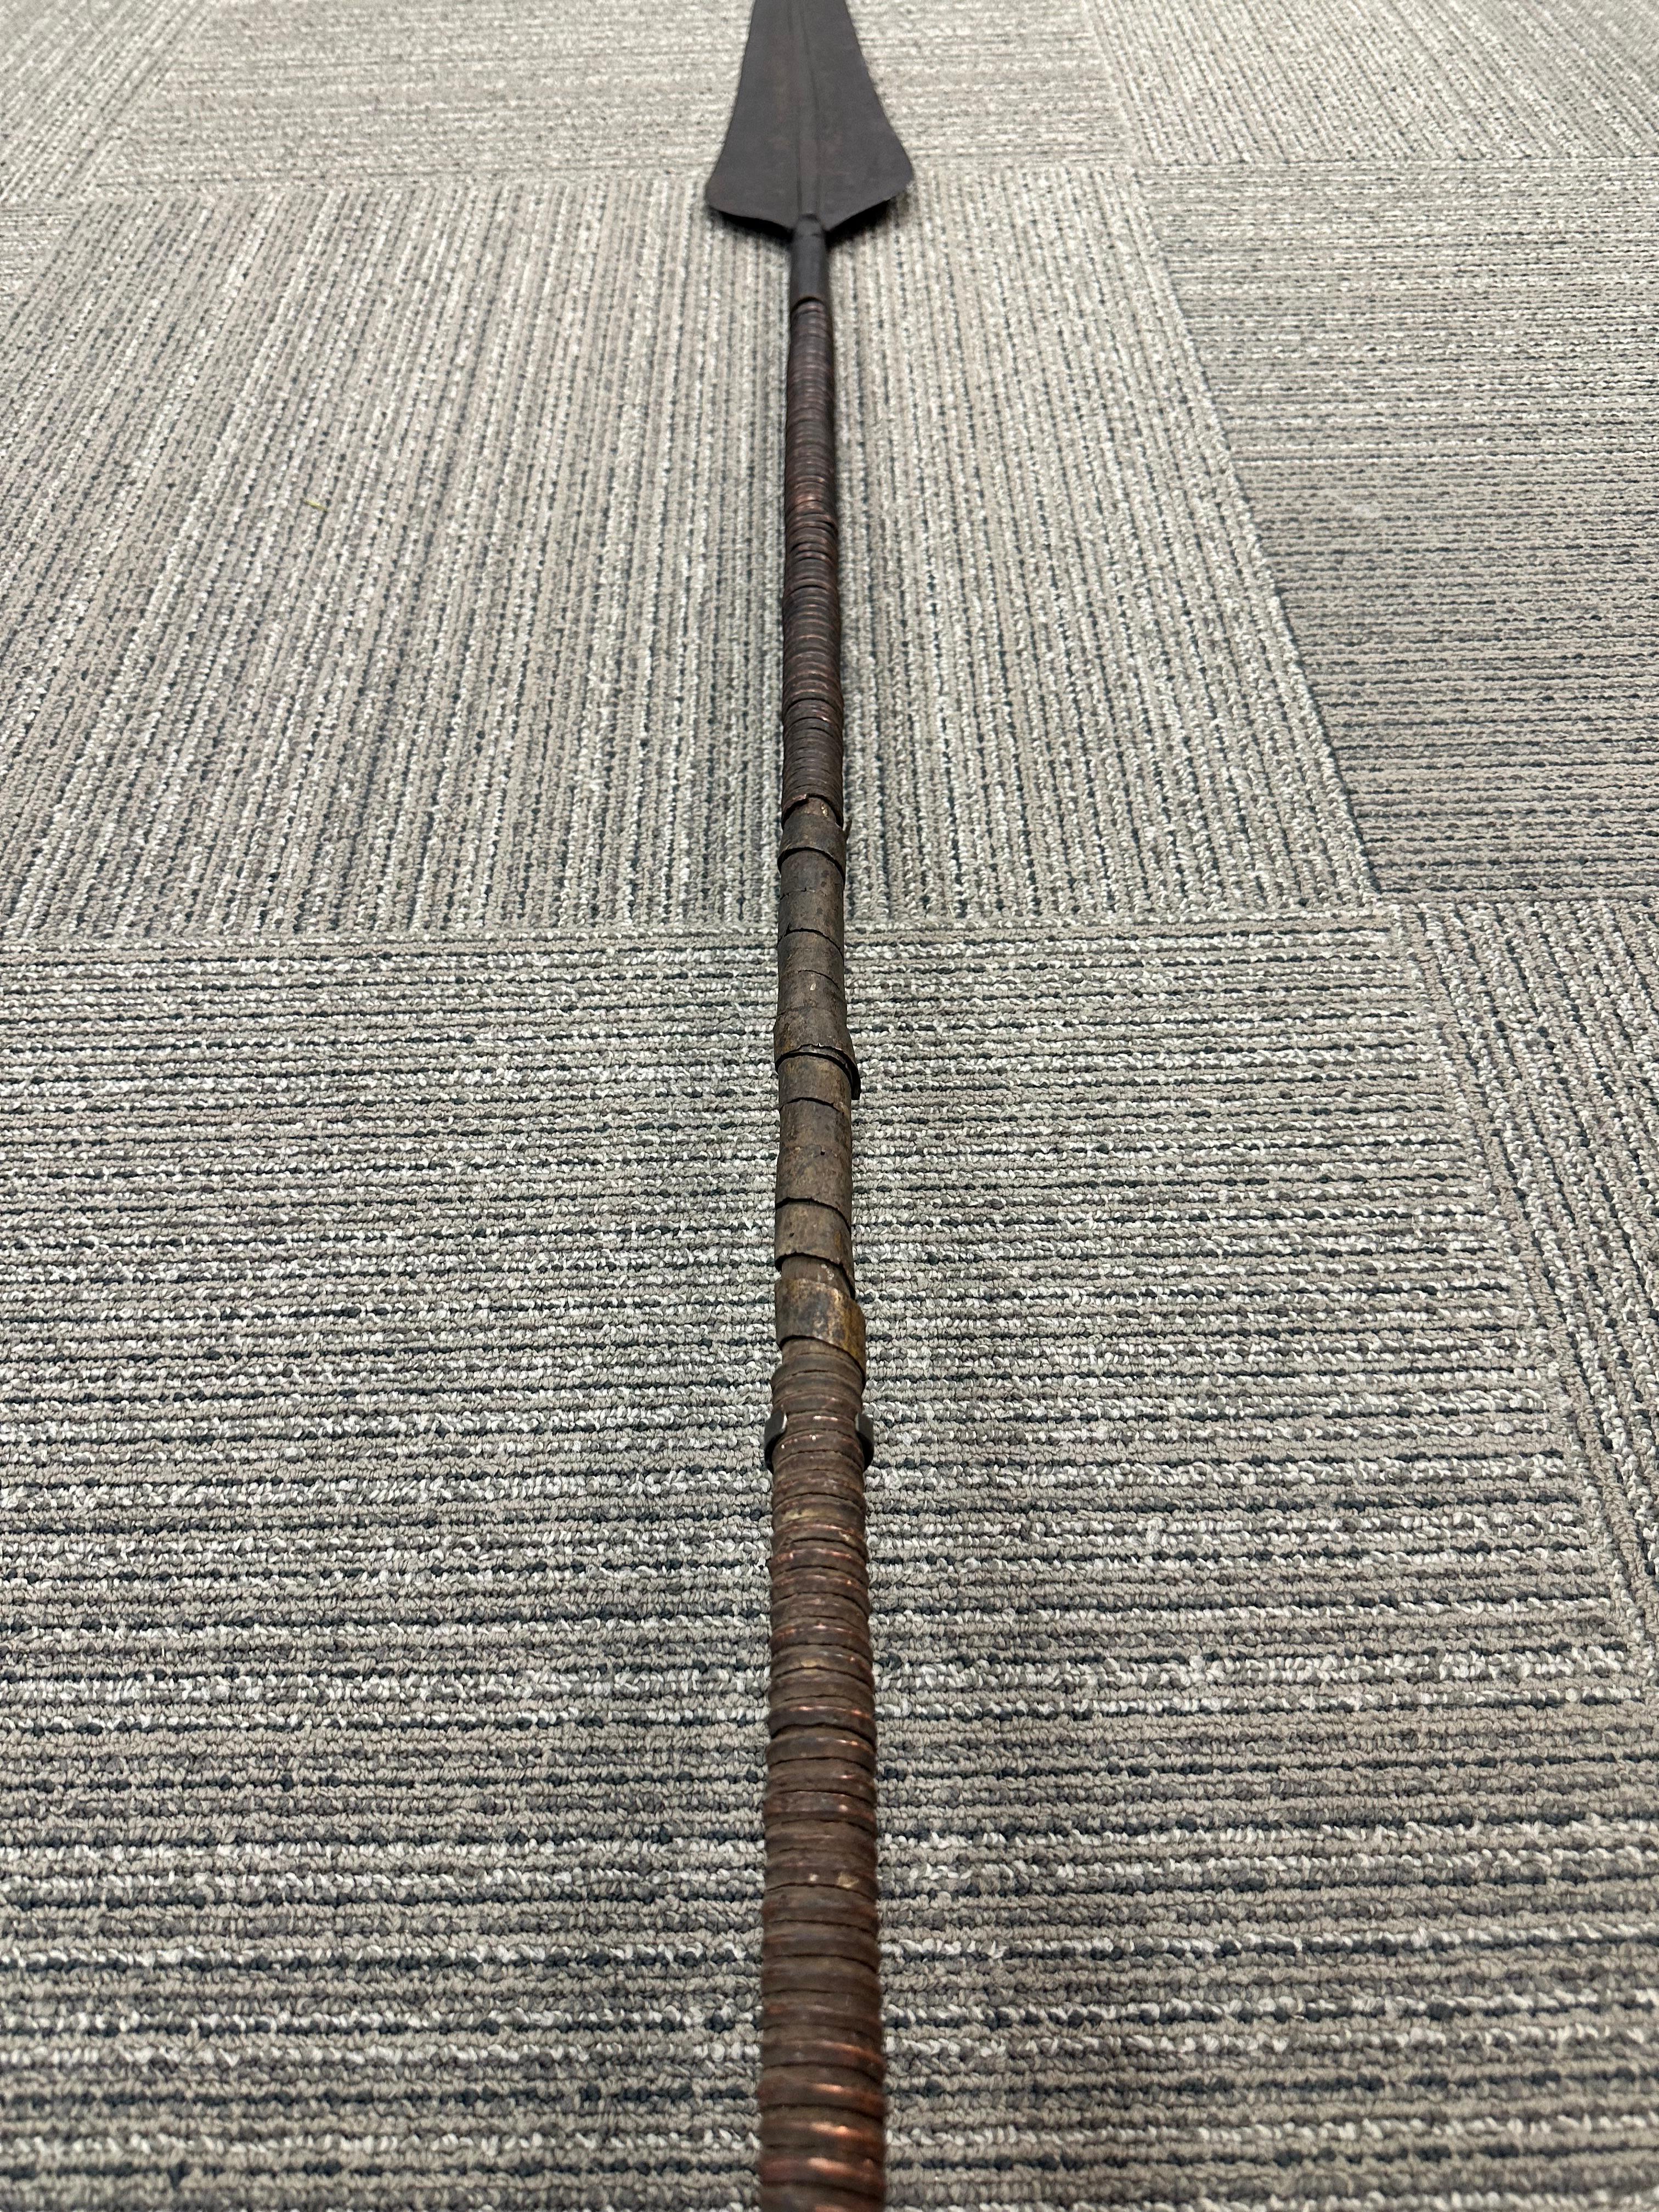 African Ceremonial Iron and Wood Spears 4